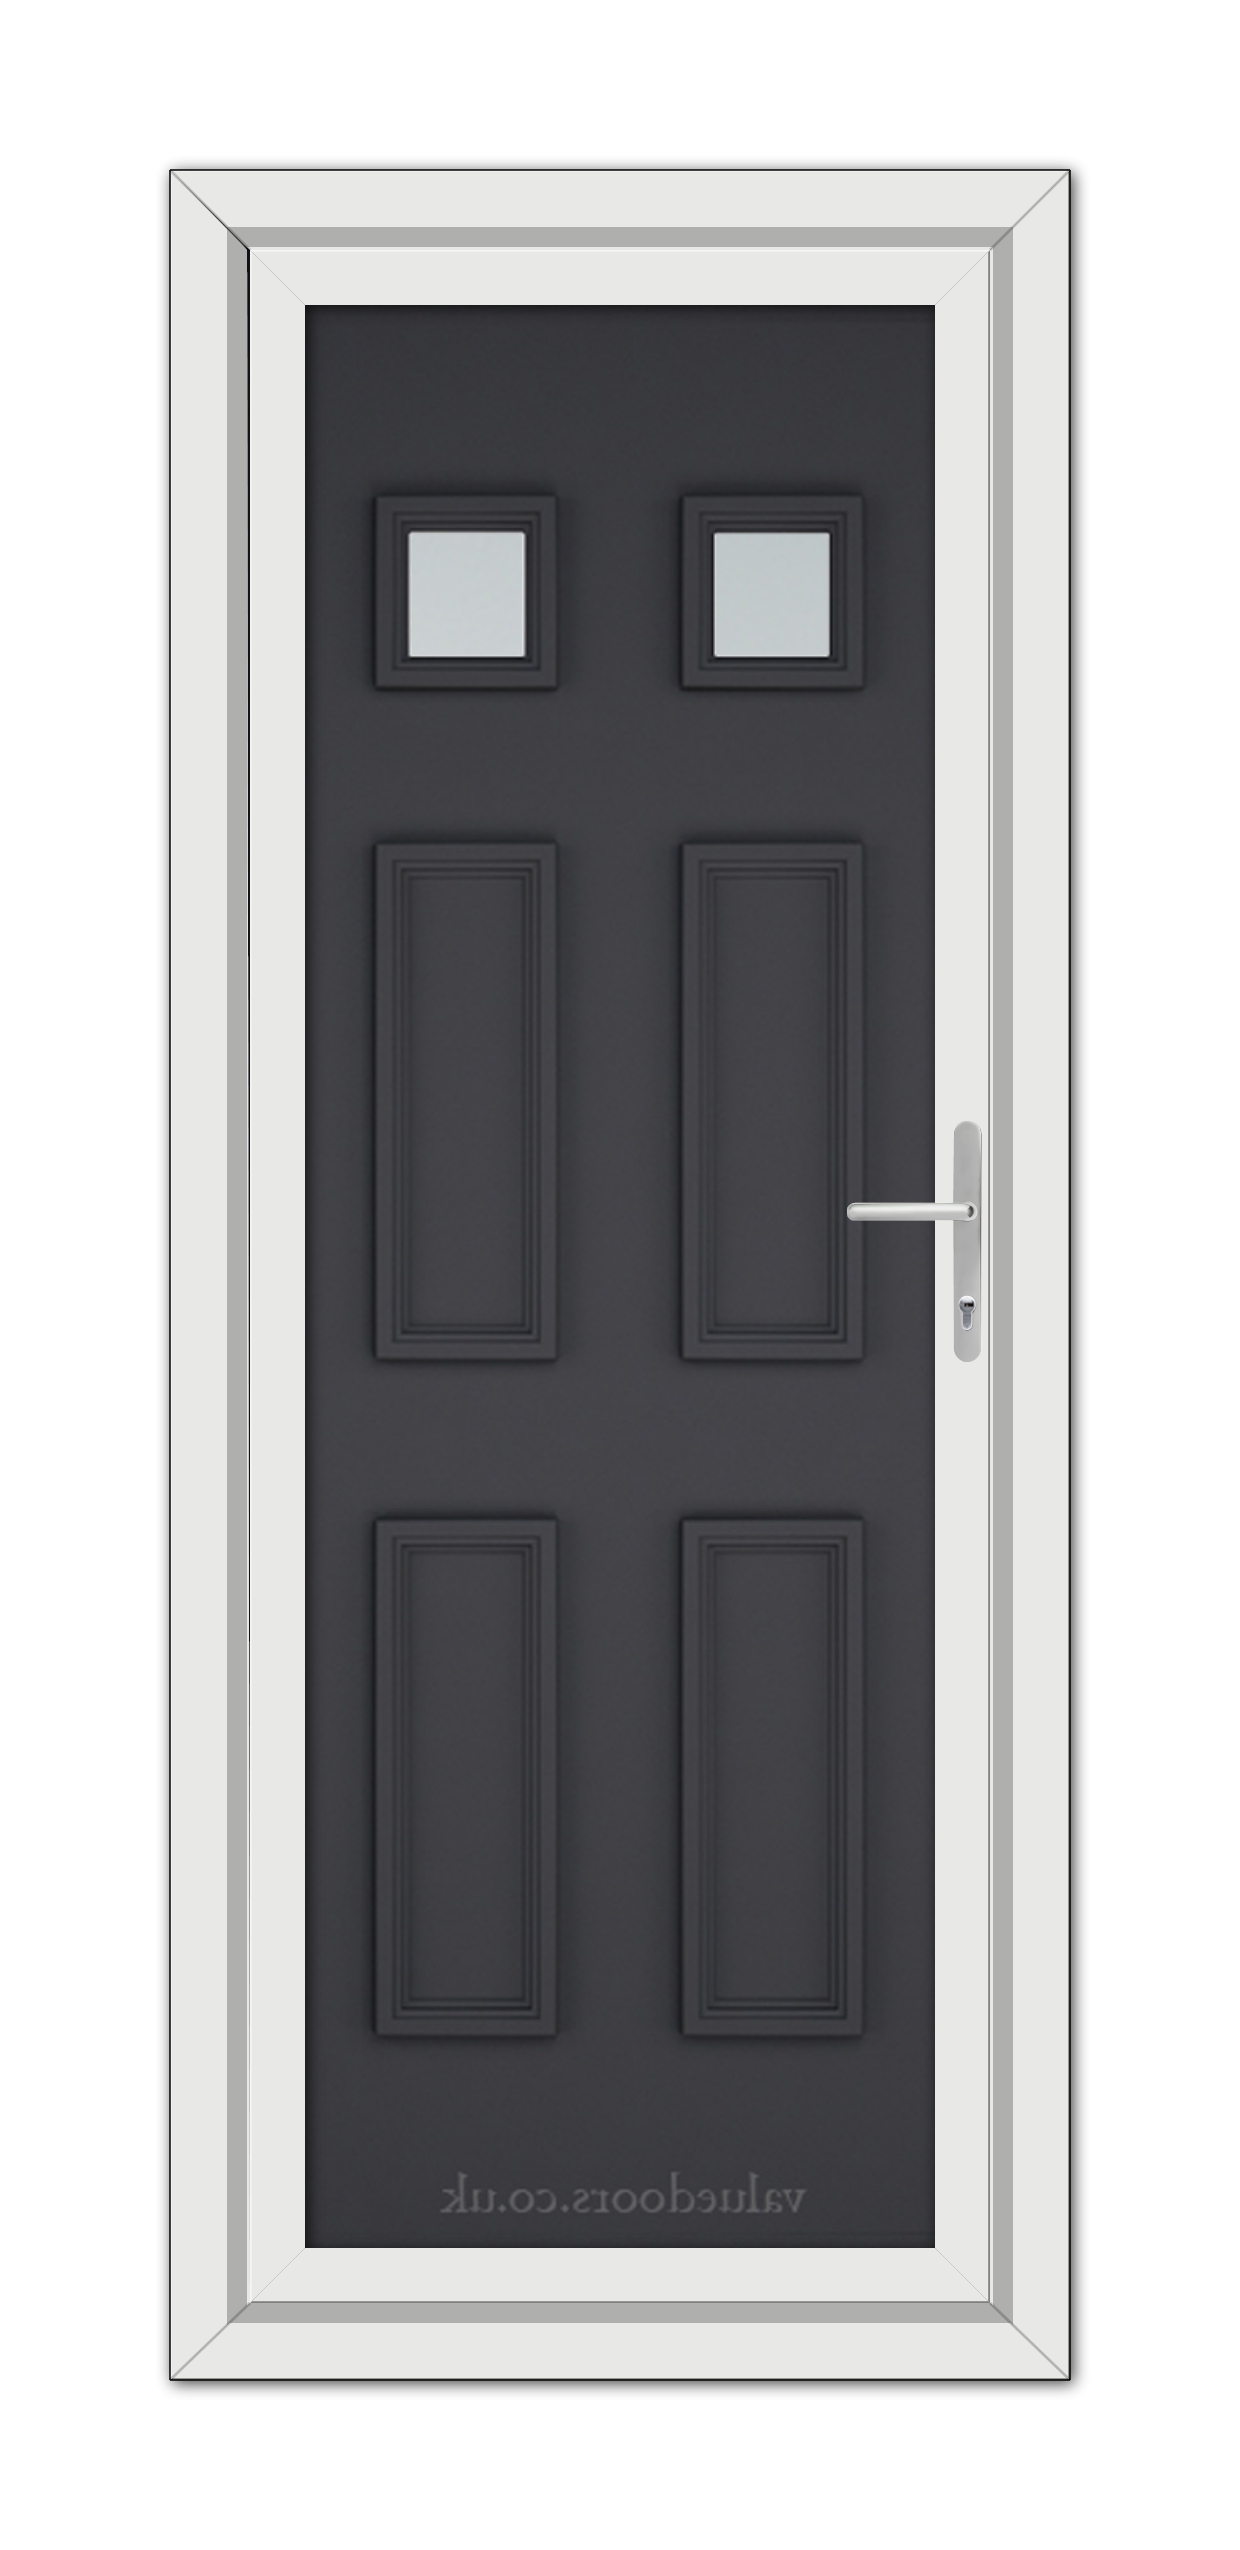 Modern Grey Windsor uPVC Door with two small square windows, framed in white with a metallic handle on the right side.